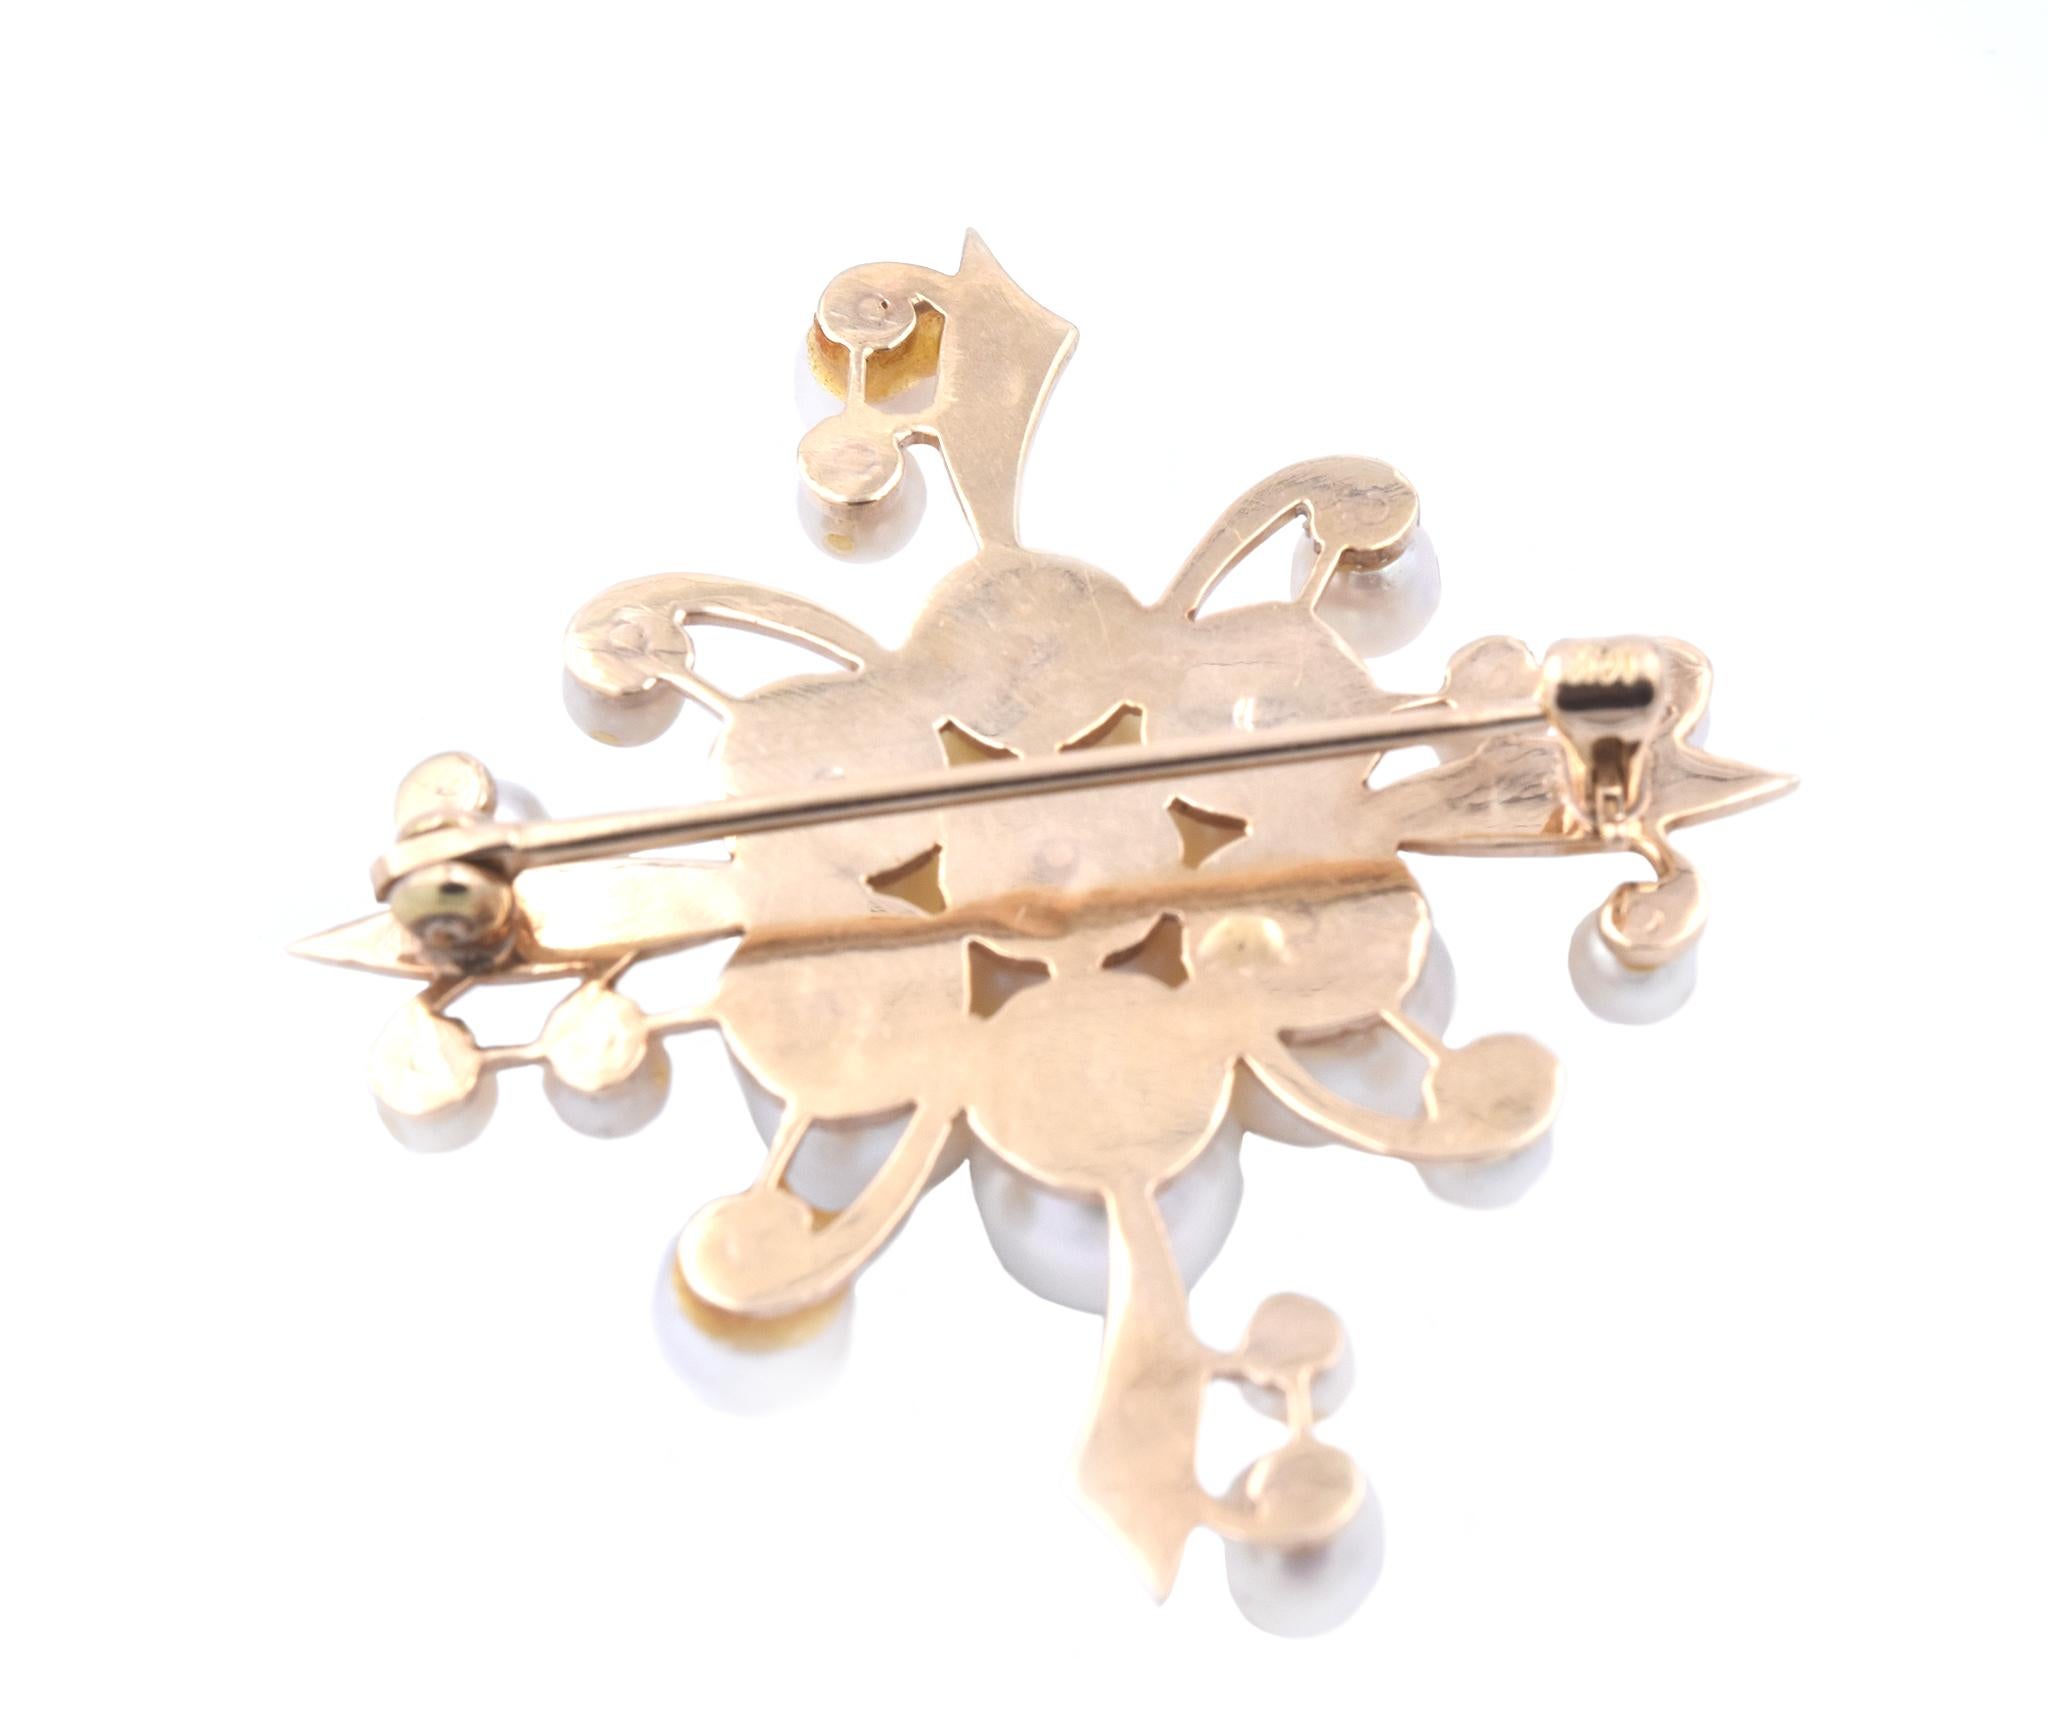 Material: 14k yellow gold
Pearl: 3.5mm – 7.0mm
Dimensions: pin measures 40.35mm x 43.15mm
Weight: 10.6 grams
